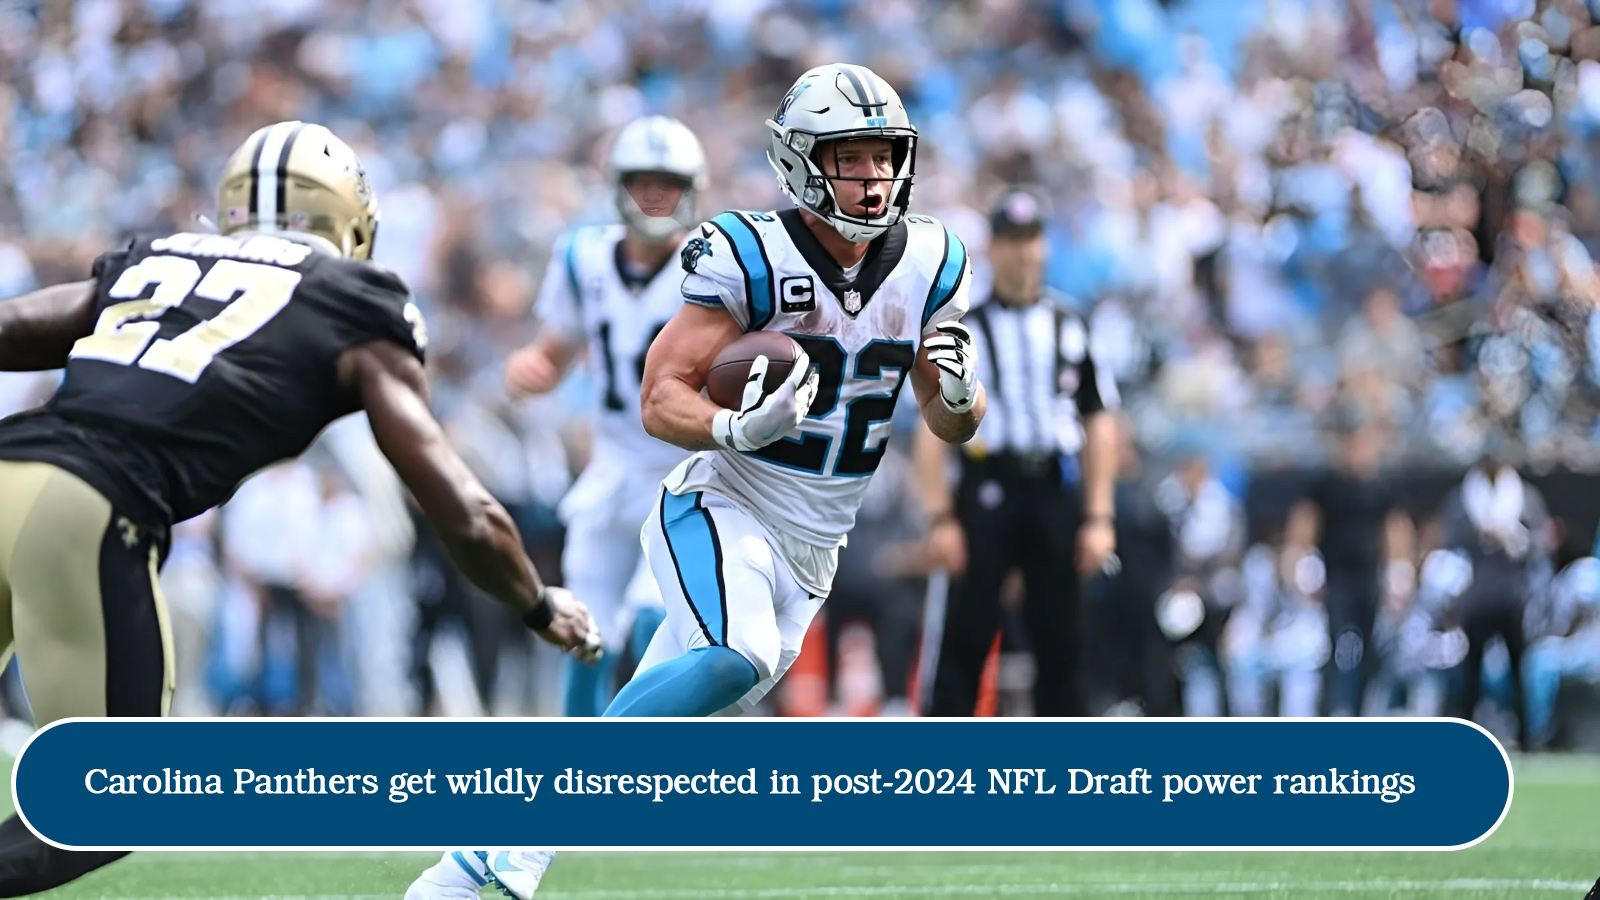 Carolina Panthers get wildly disrespected in post-2024 NFL Draft power rankings